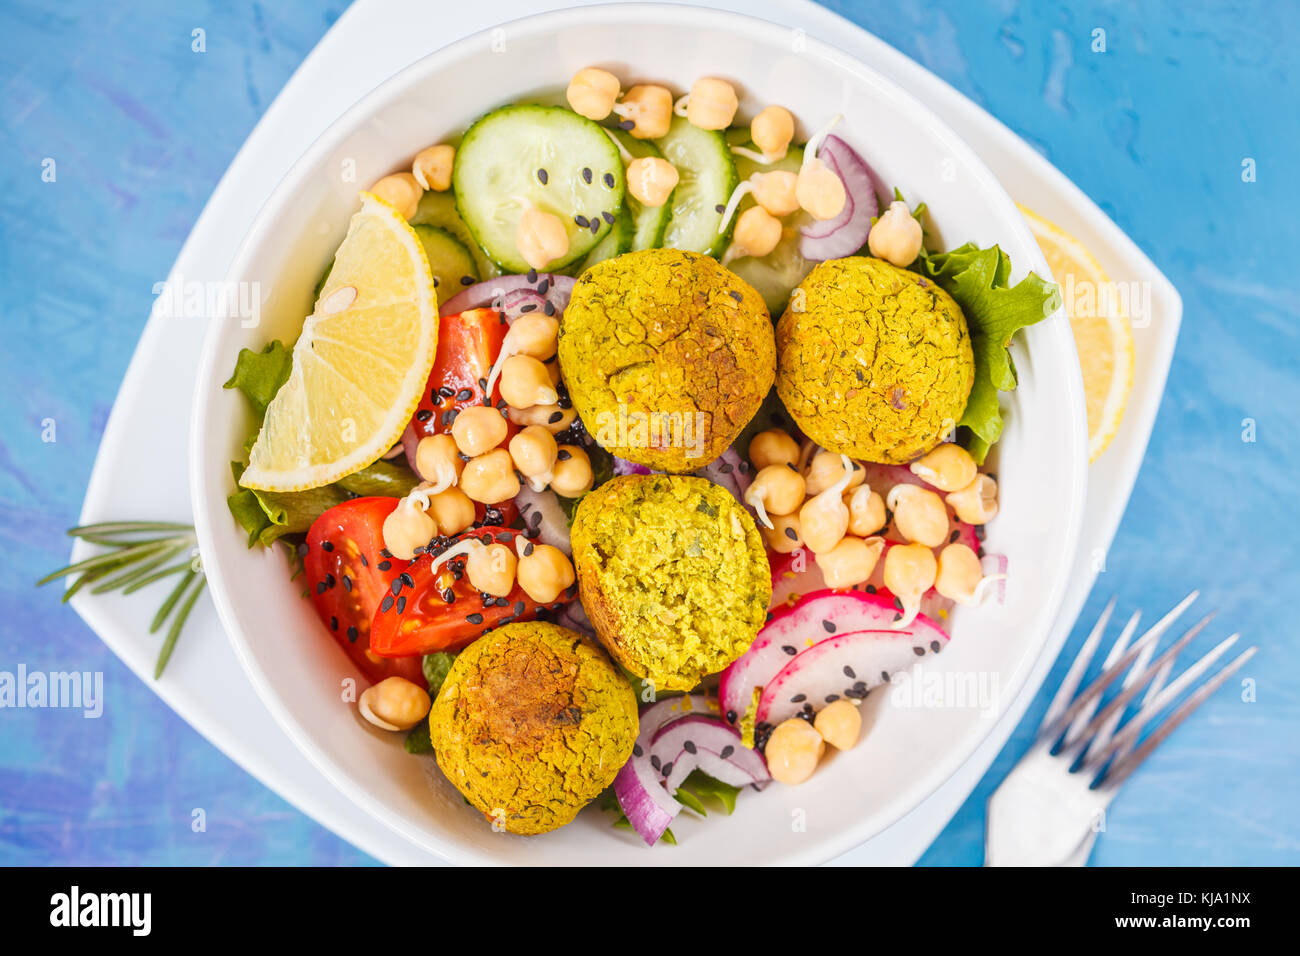 Baked falafel salad with vegetables and sprouted chickpeas, blue background. Vegan Healthy Food Concept. Stock Photo